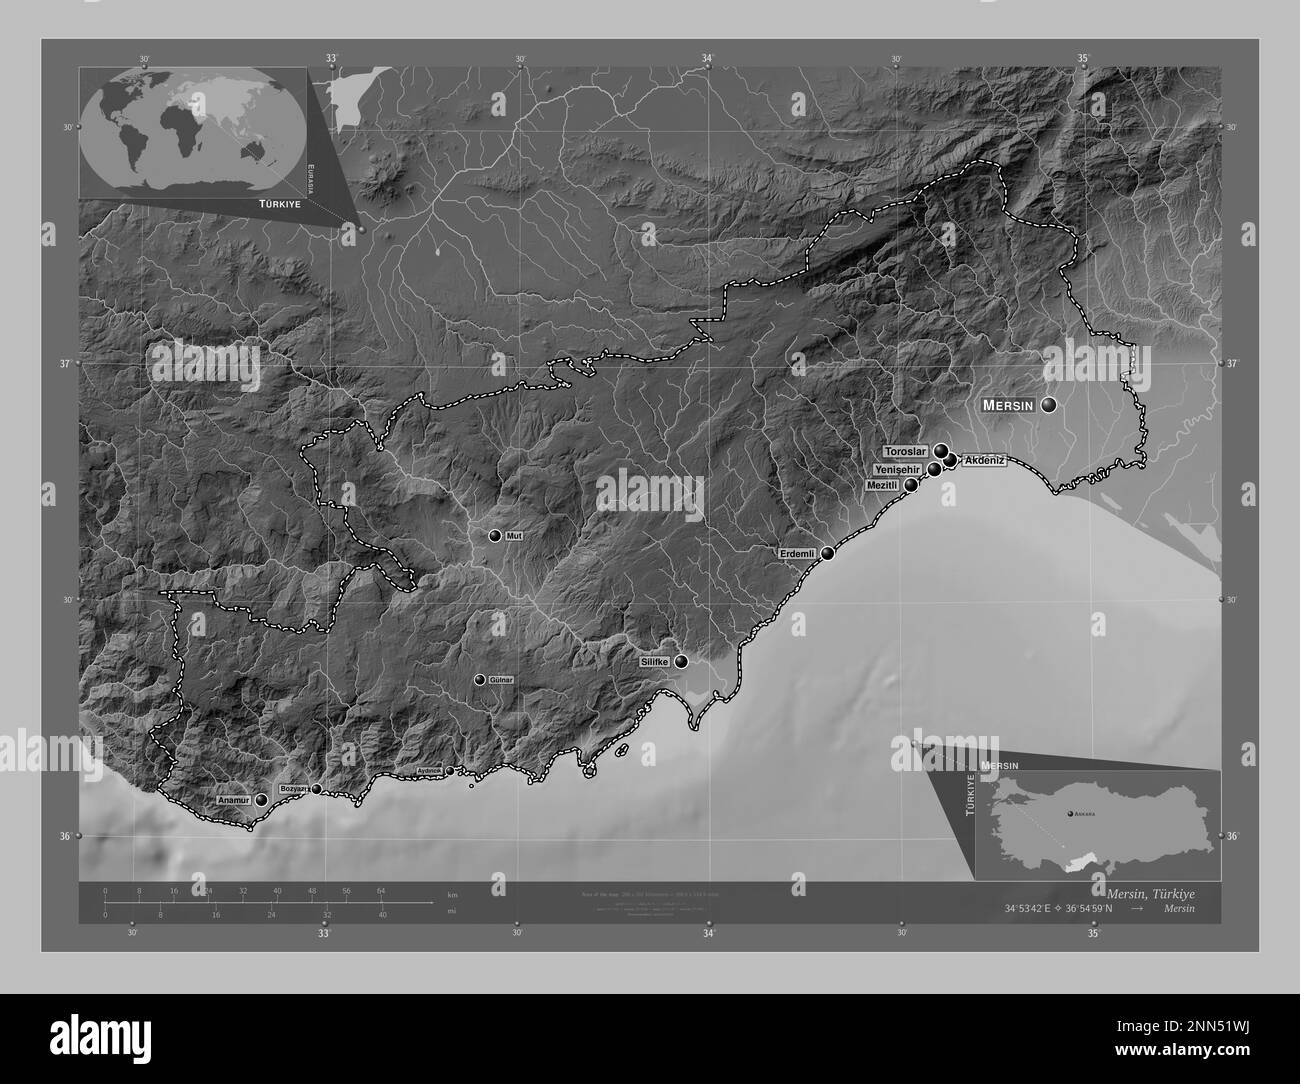 Mersin, province of Turkiye. Grayscale elevation map with lakes and rivers. Locations and names of major cities of the region. Corner auxiliary locati Stock Photo